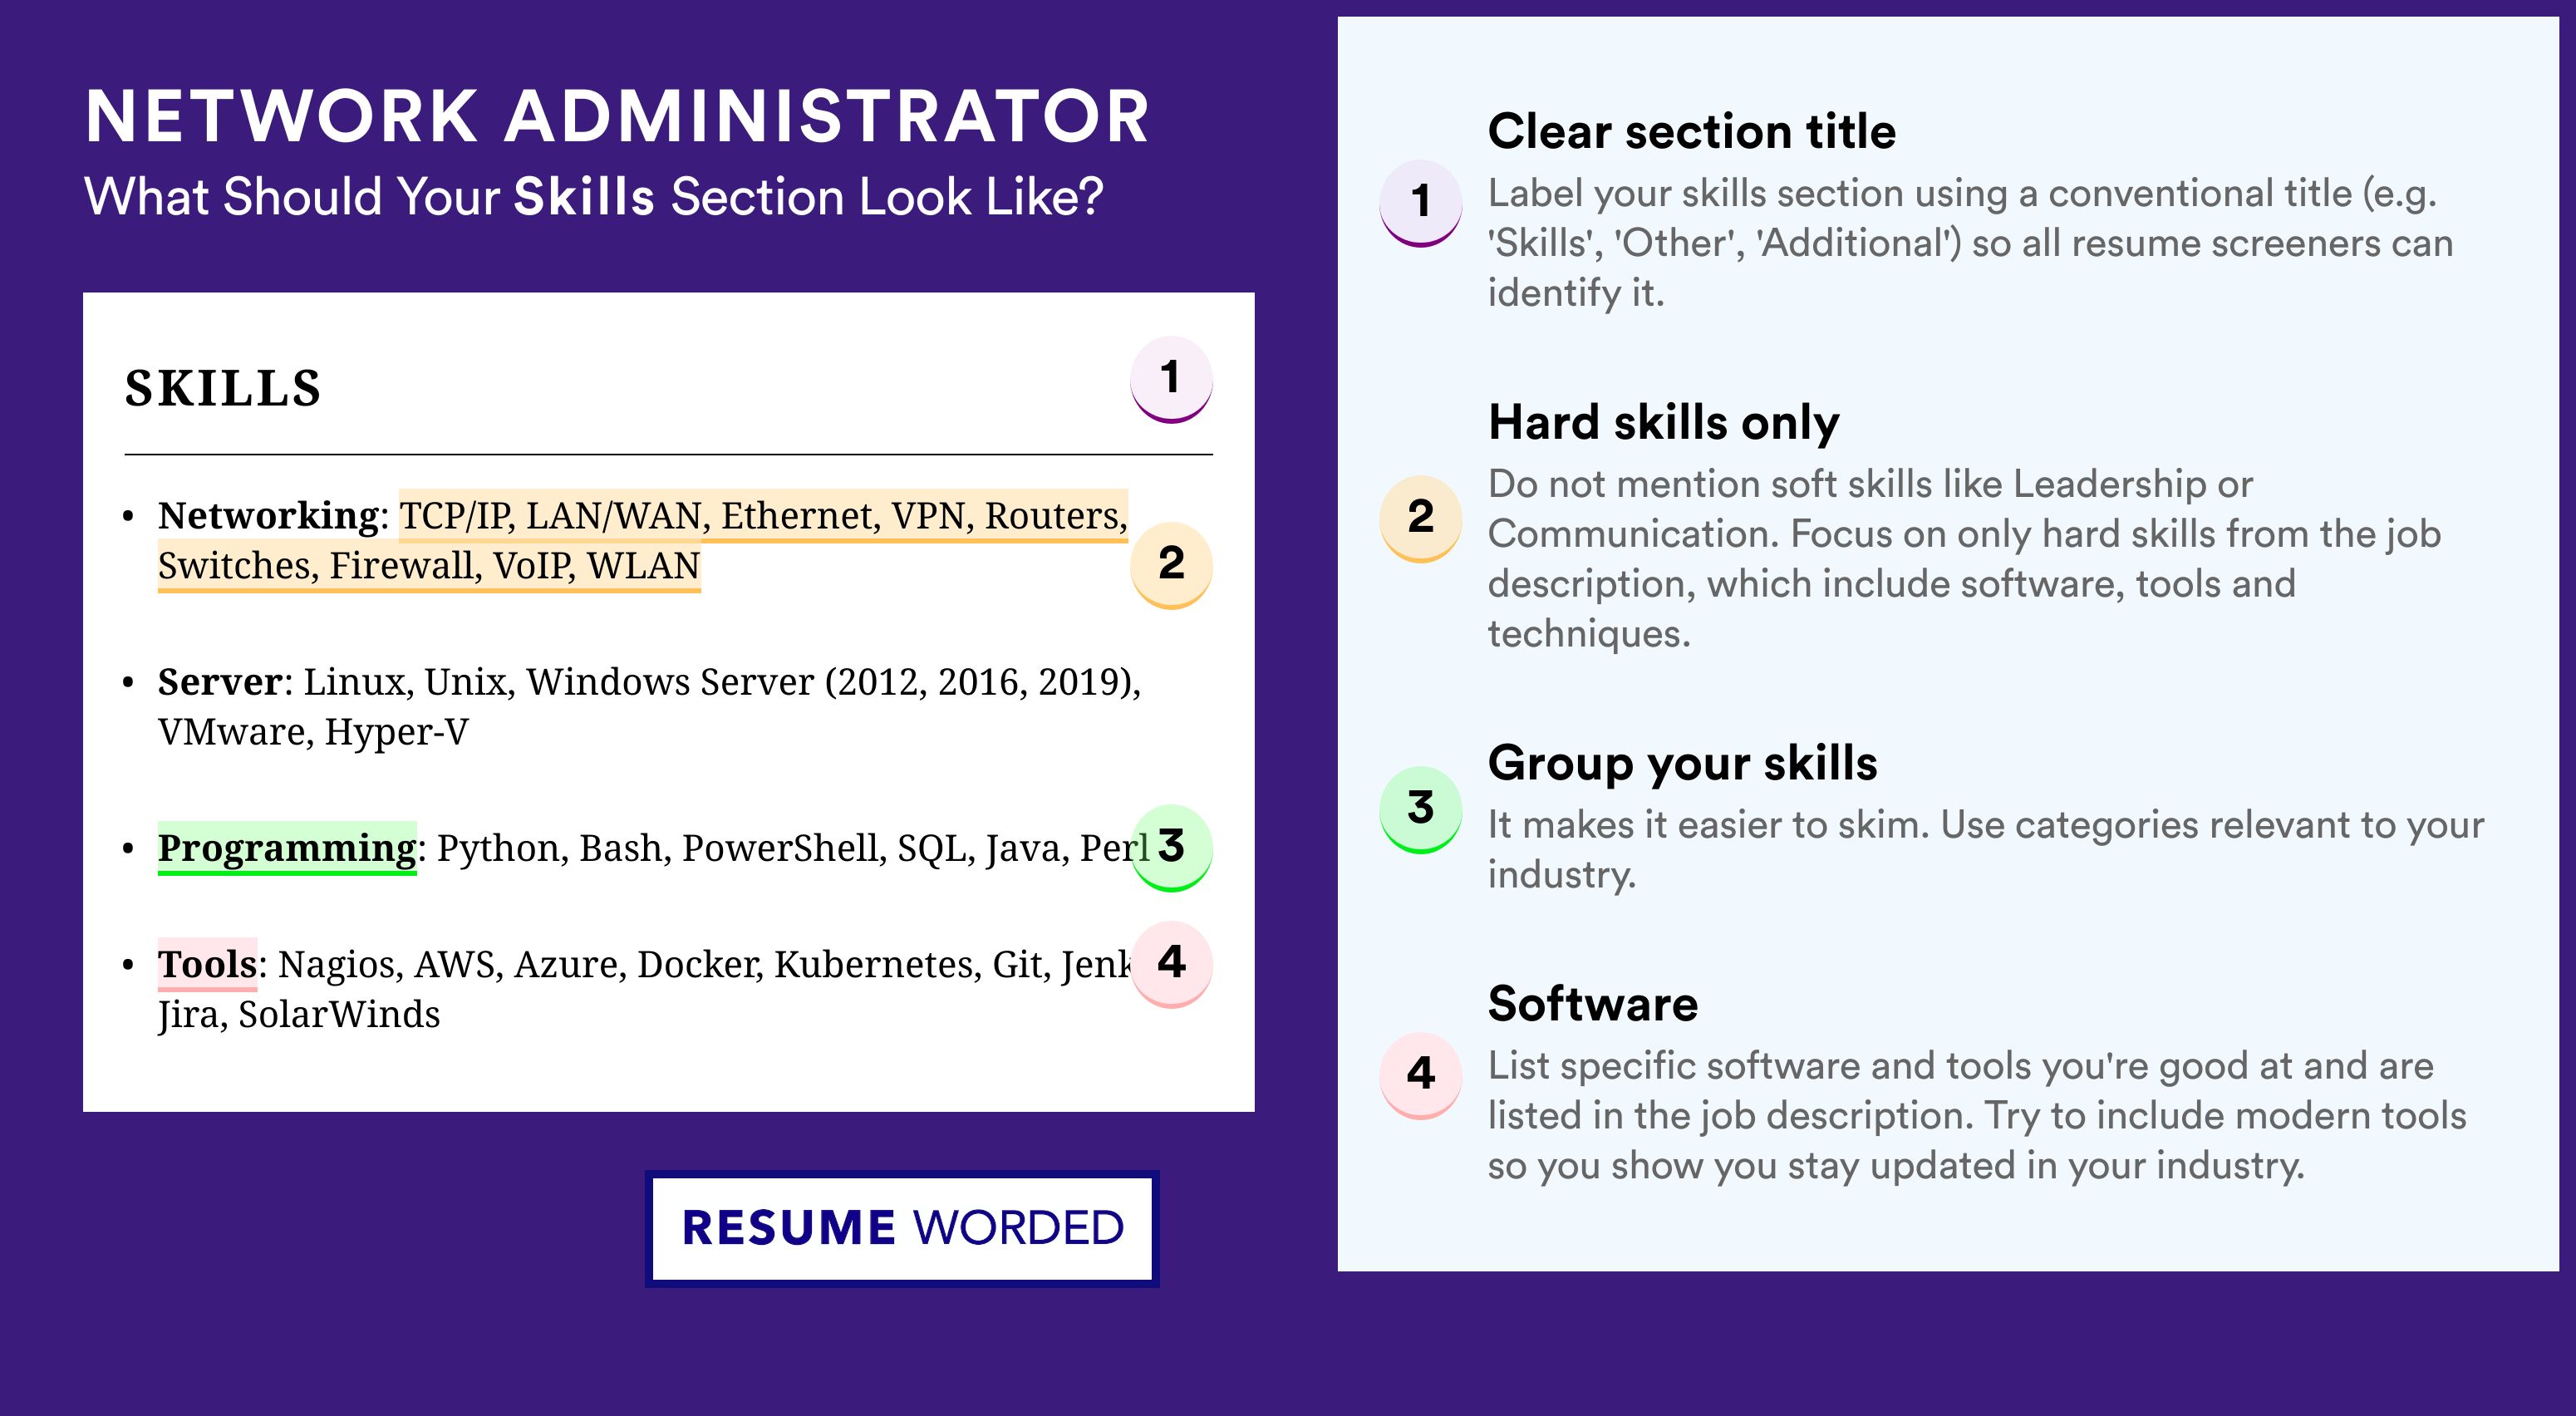 How To Write Your Skills Section - Network Administrator Roles